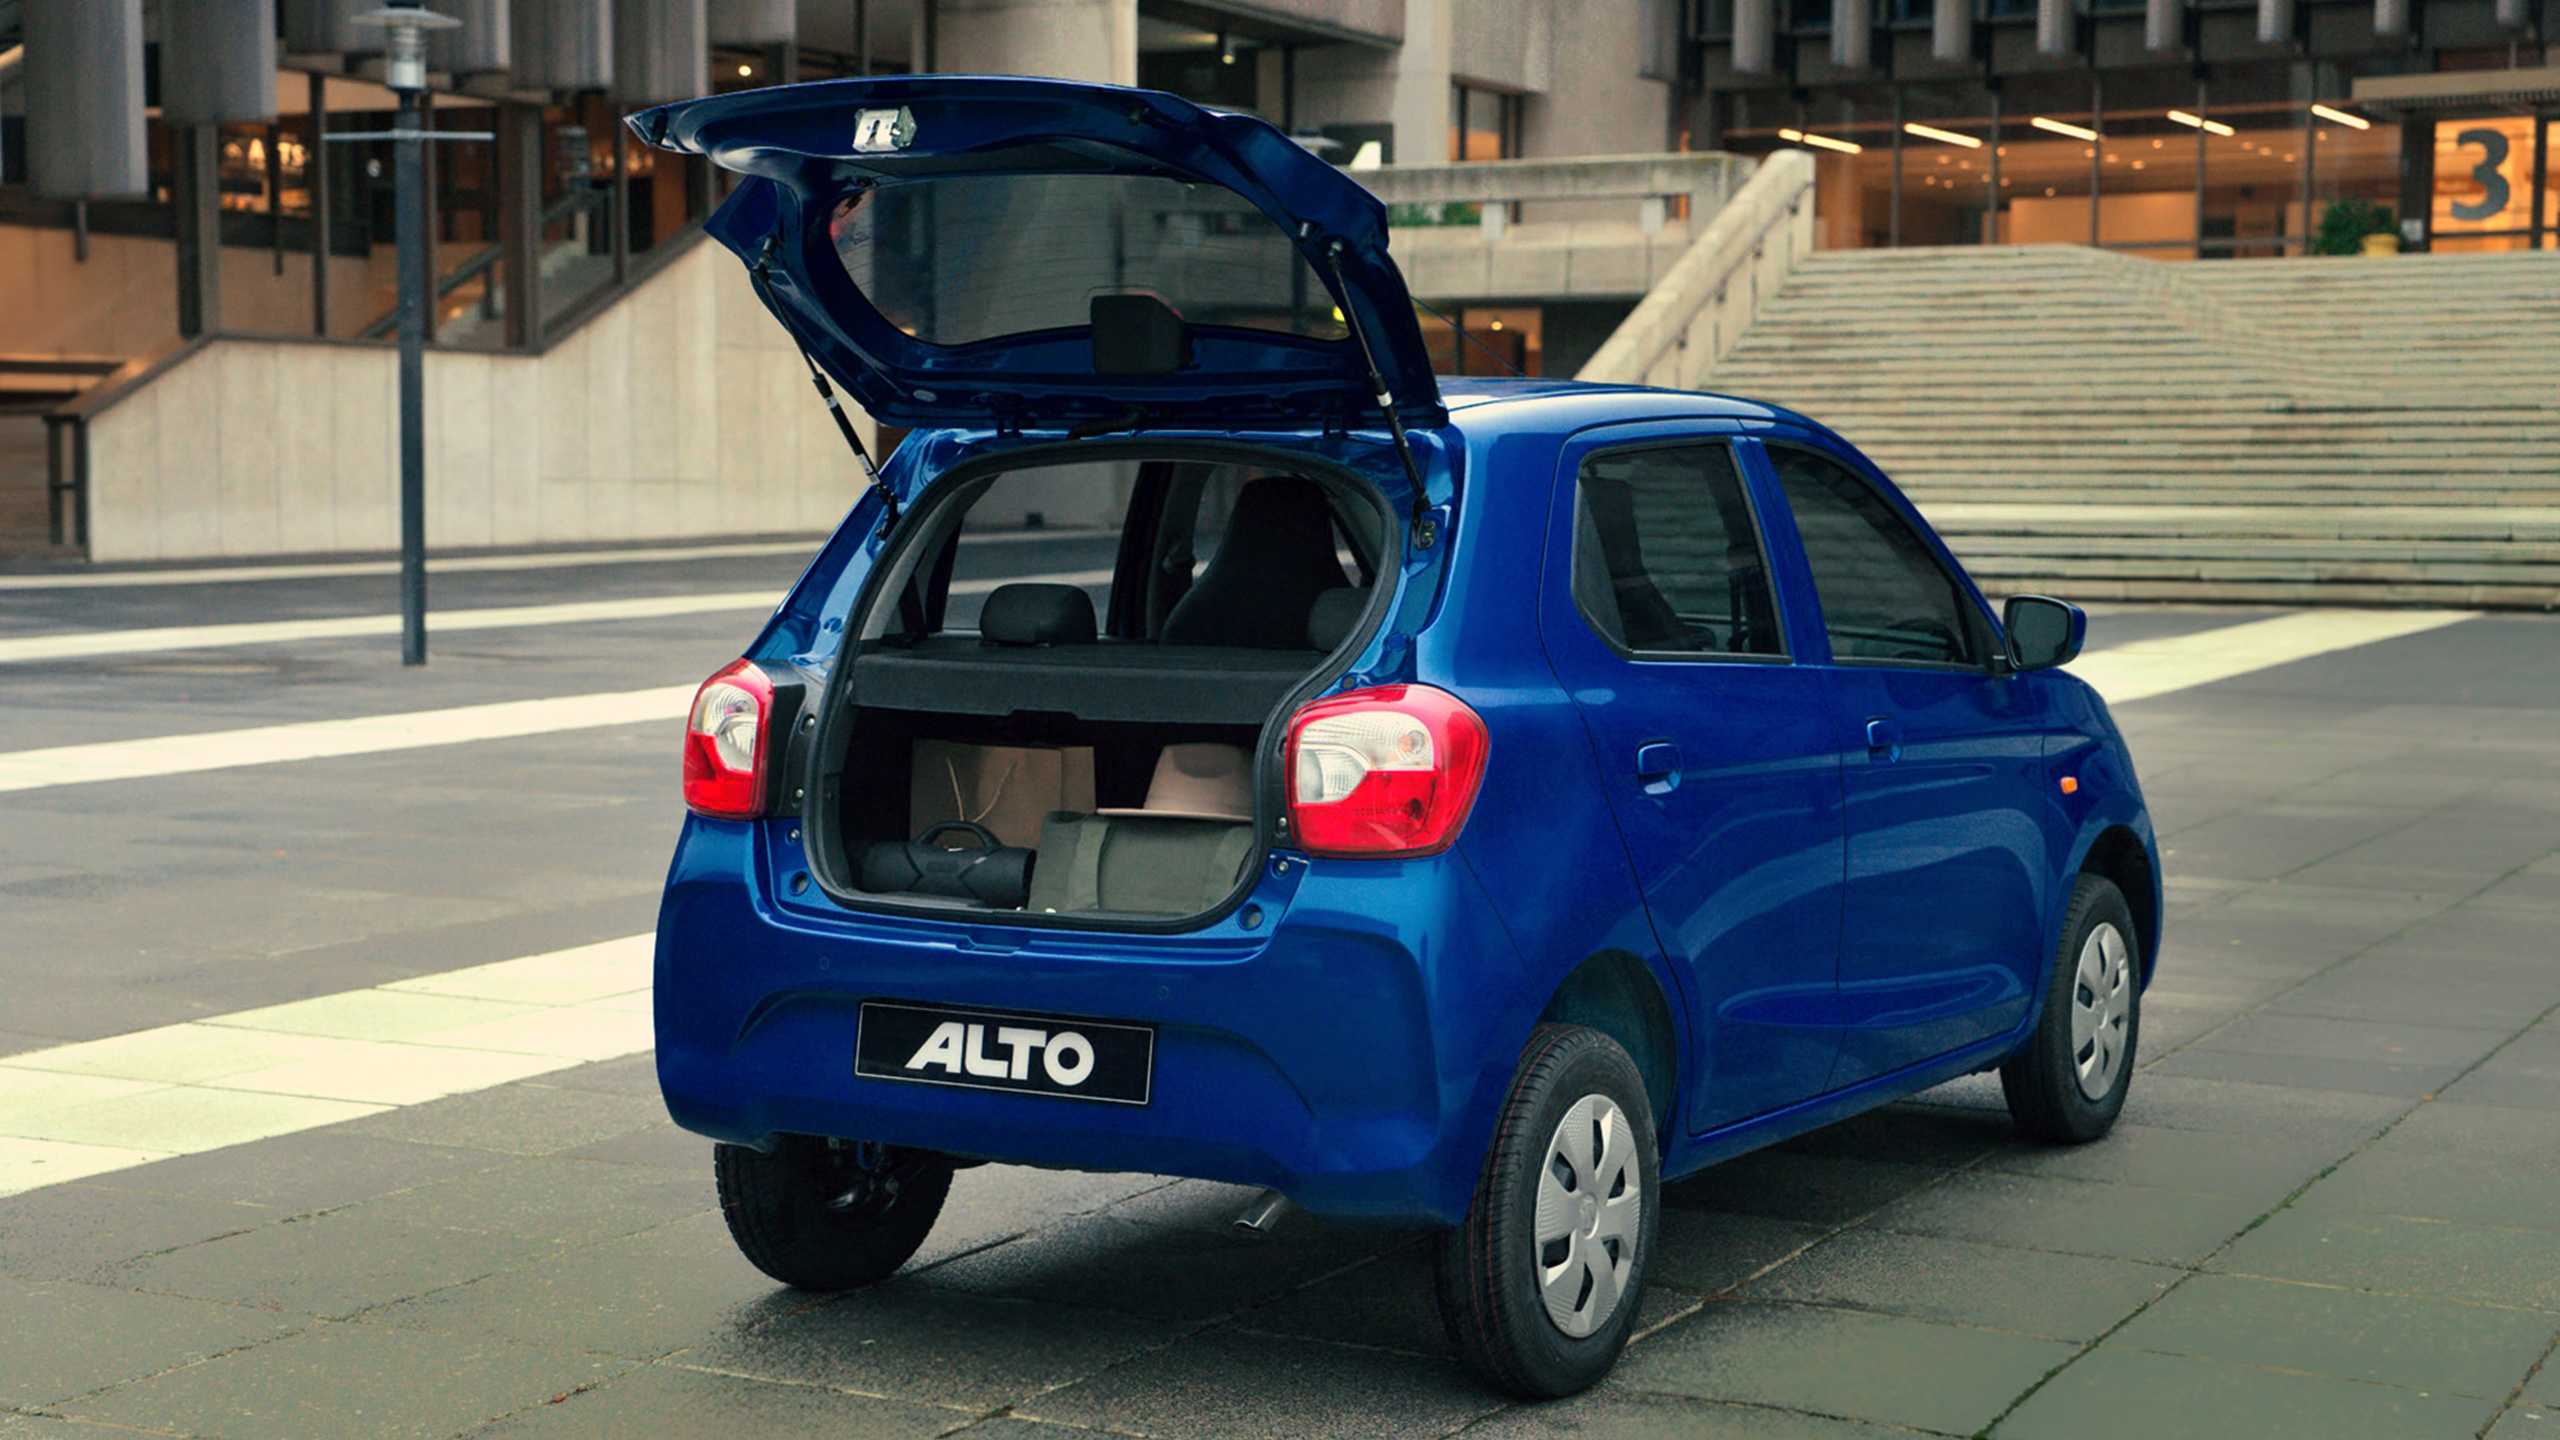 Alto side driving in city